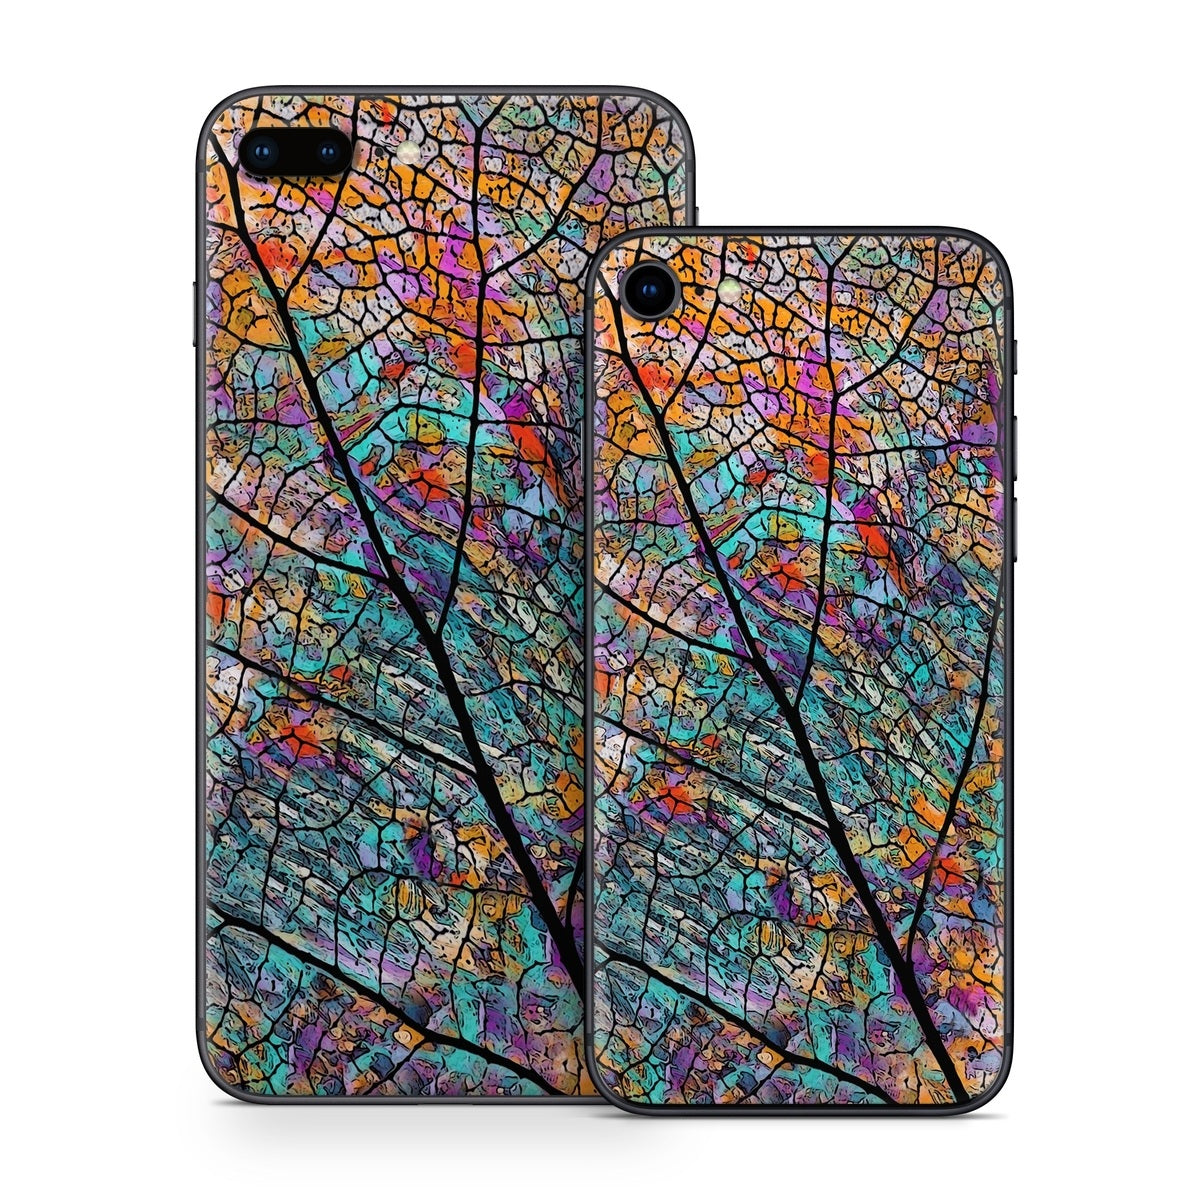 Stained Aspen - Apple iPhone 8 Skin